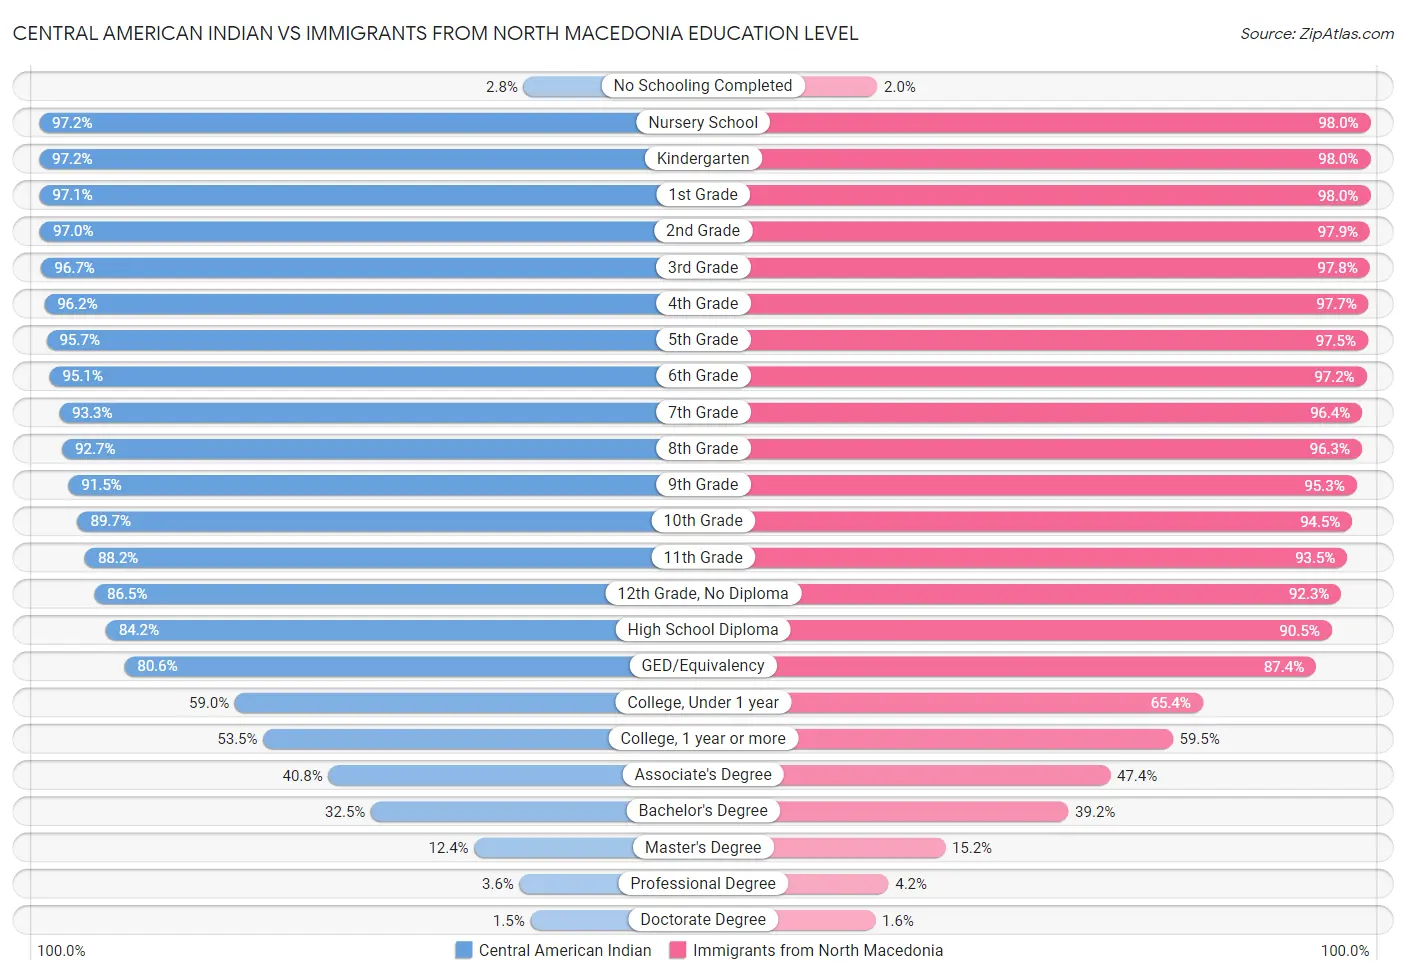 Central American Indian vs Immigrants from North Macedonia Education Level